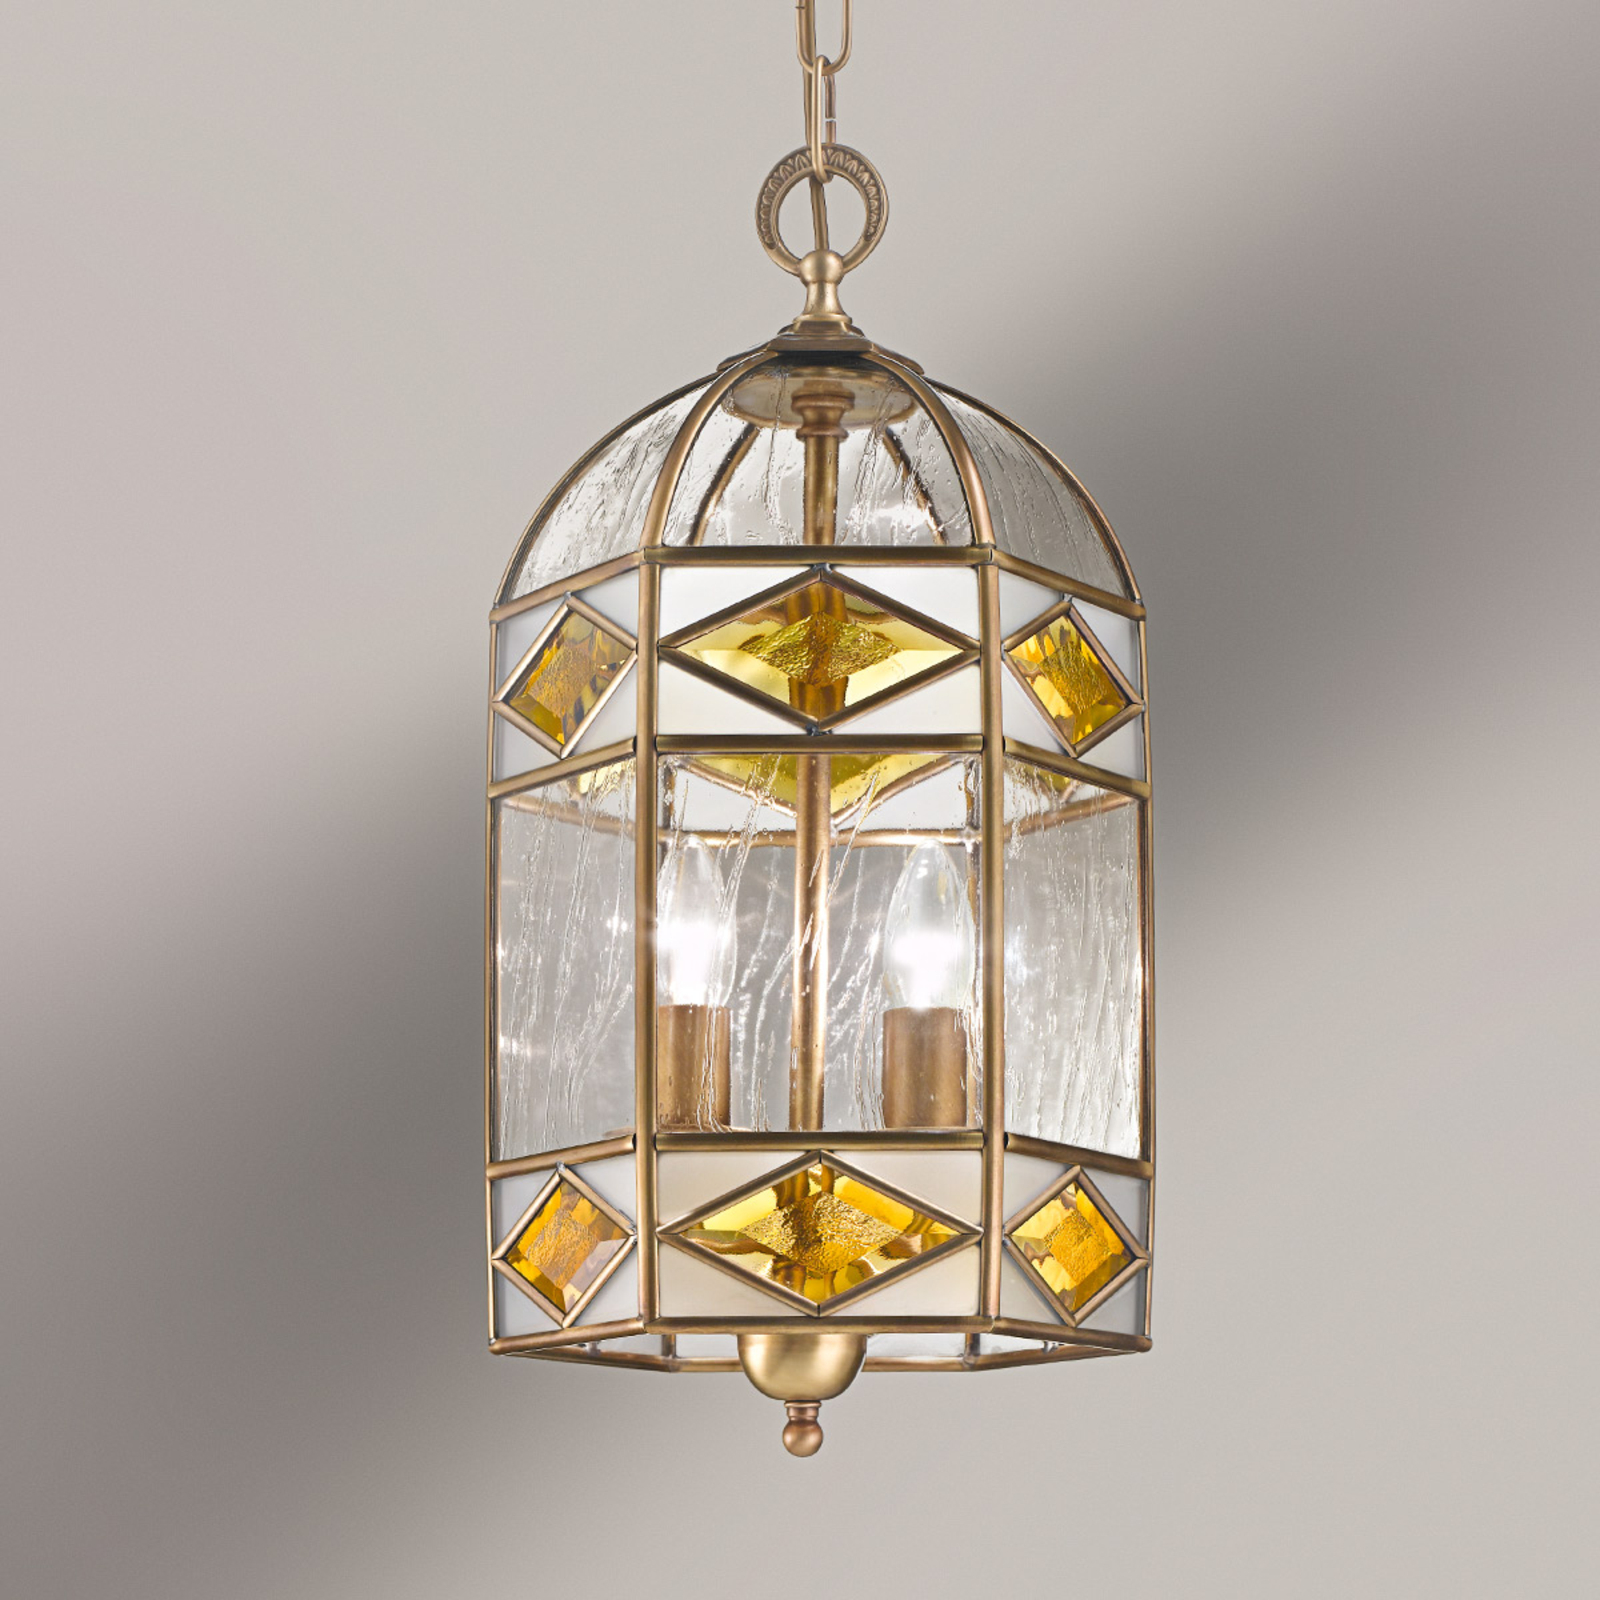 Emilia - hanging light with cathedral glass